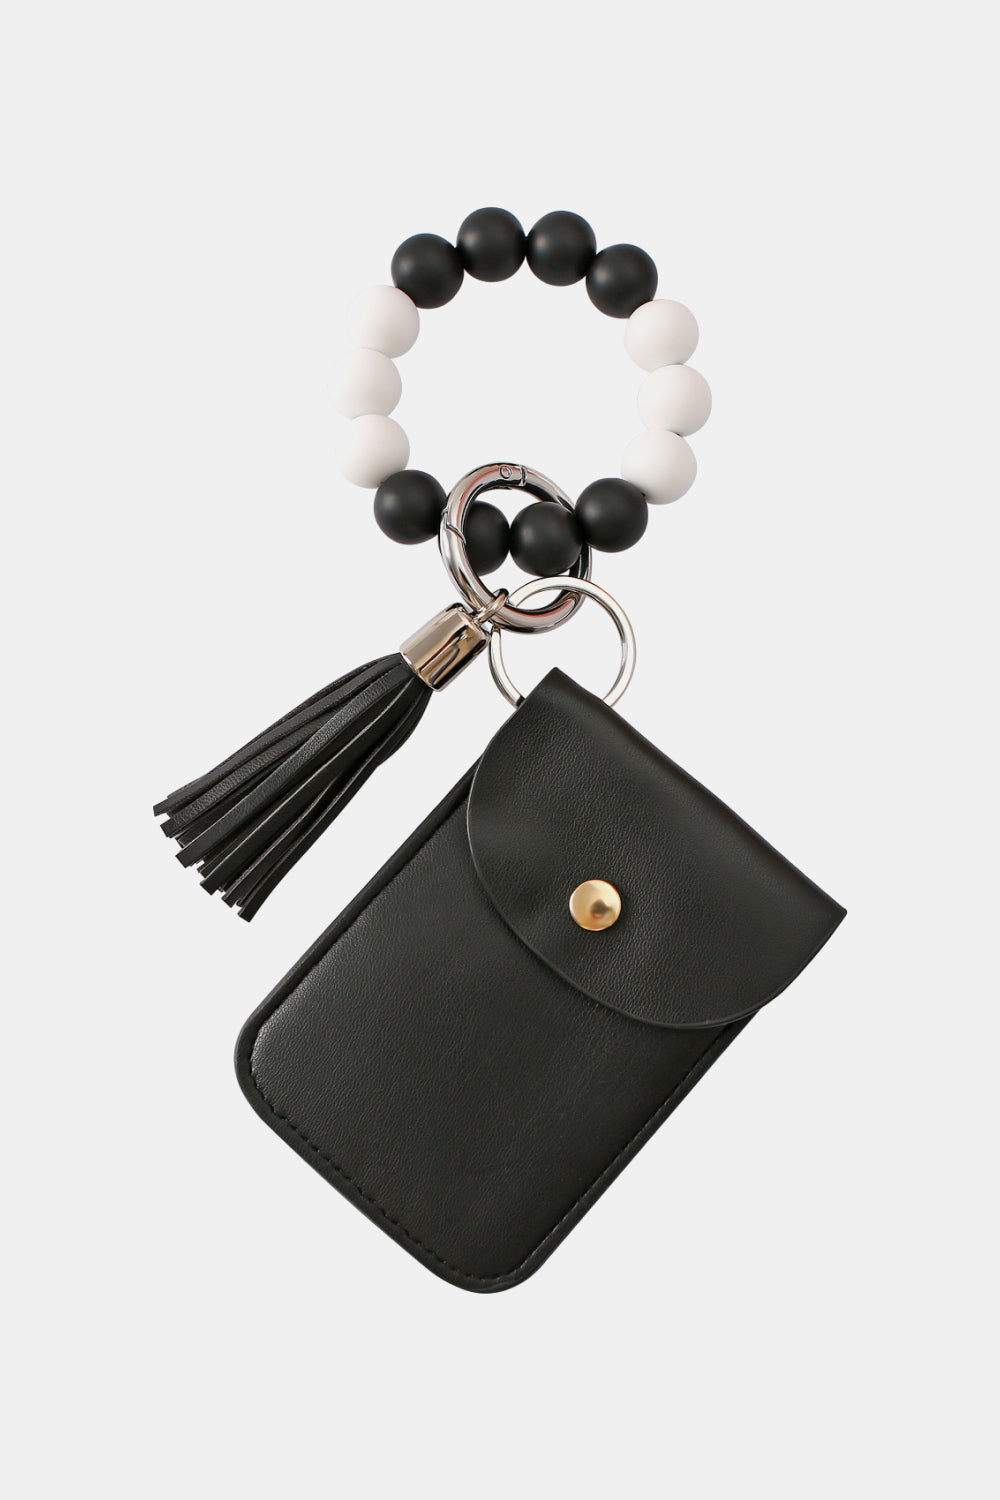 Bead Wristlet Key Chain with Wallet The Stout Steer